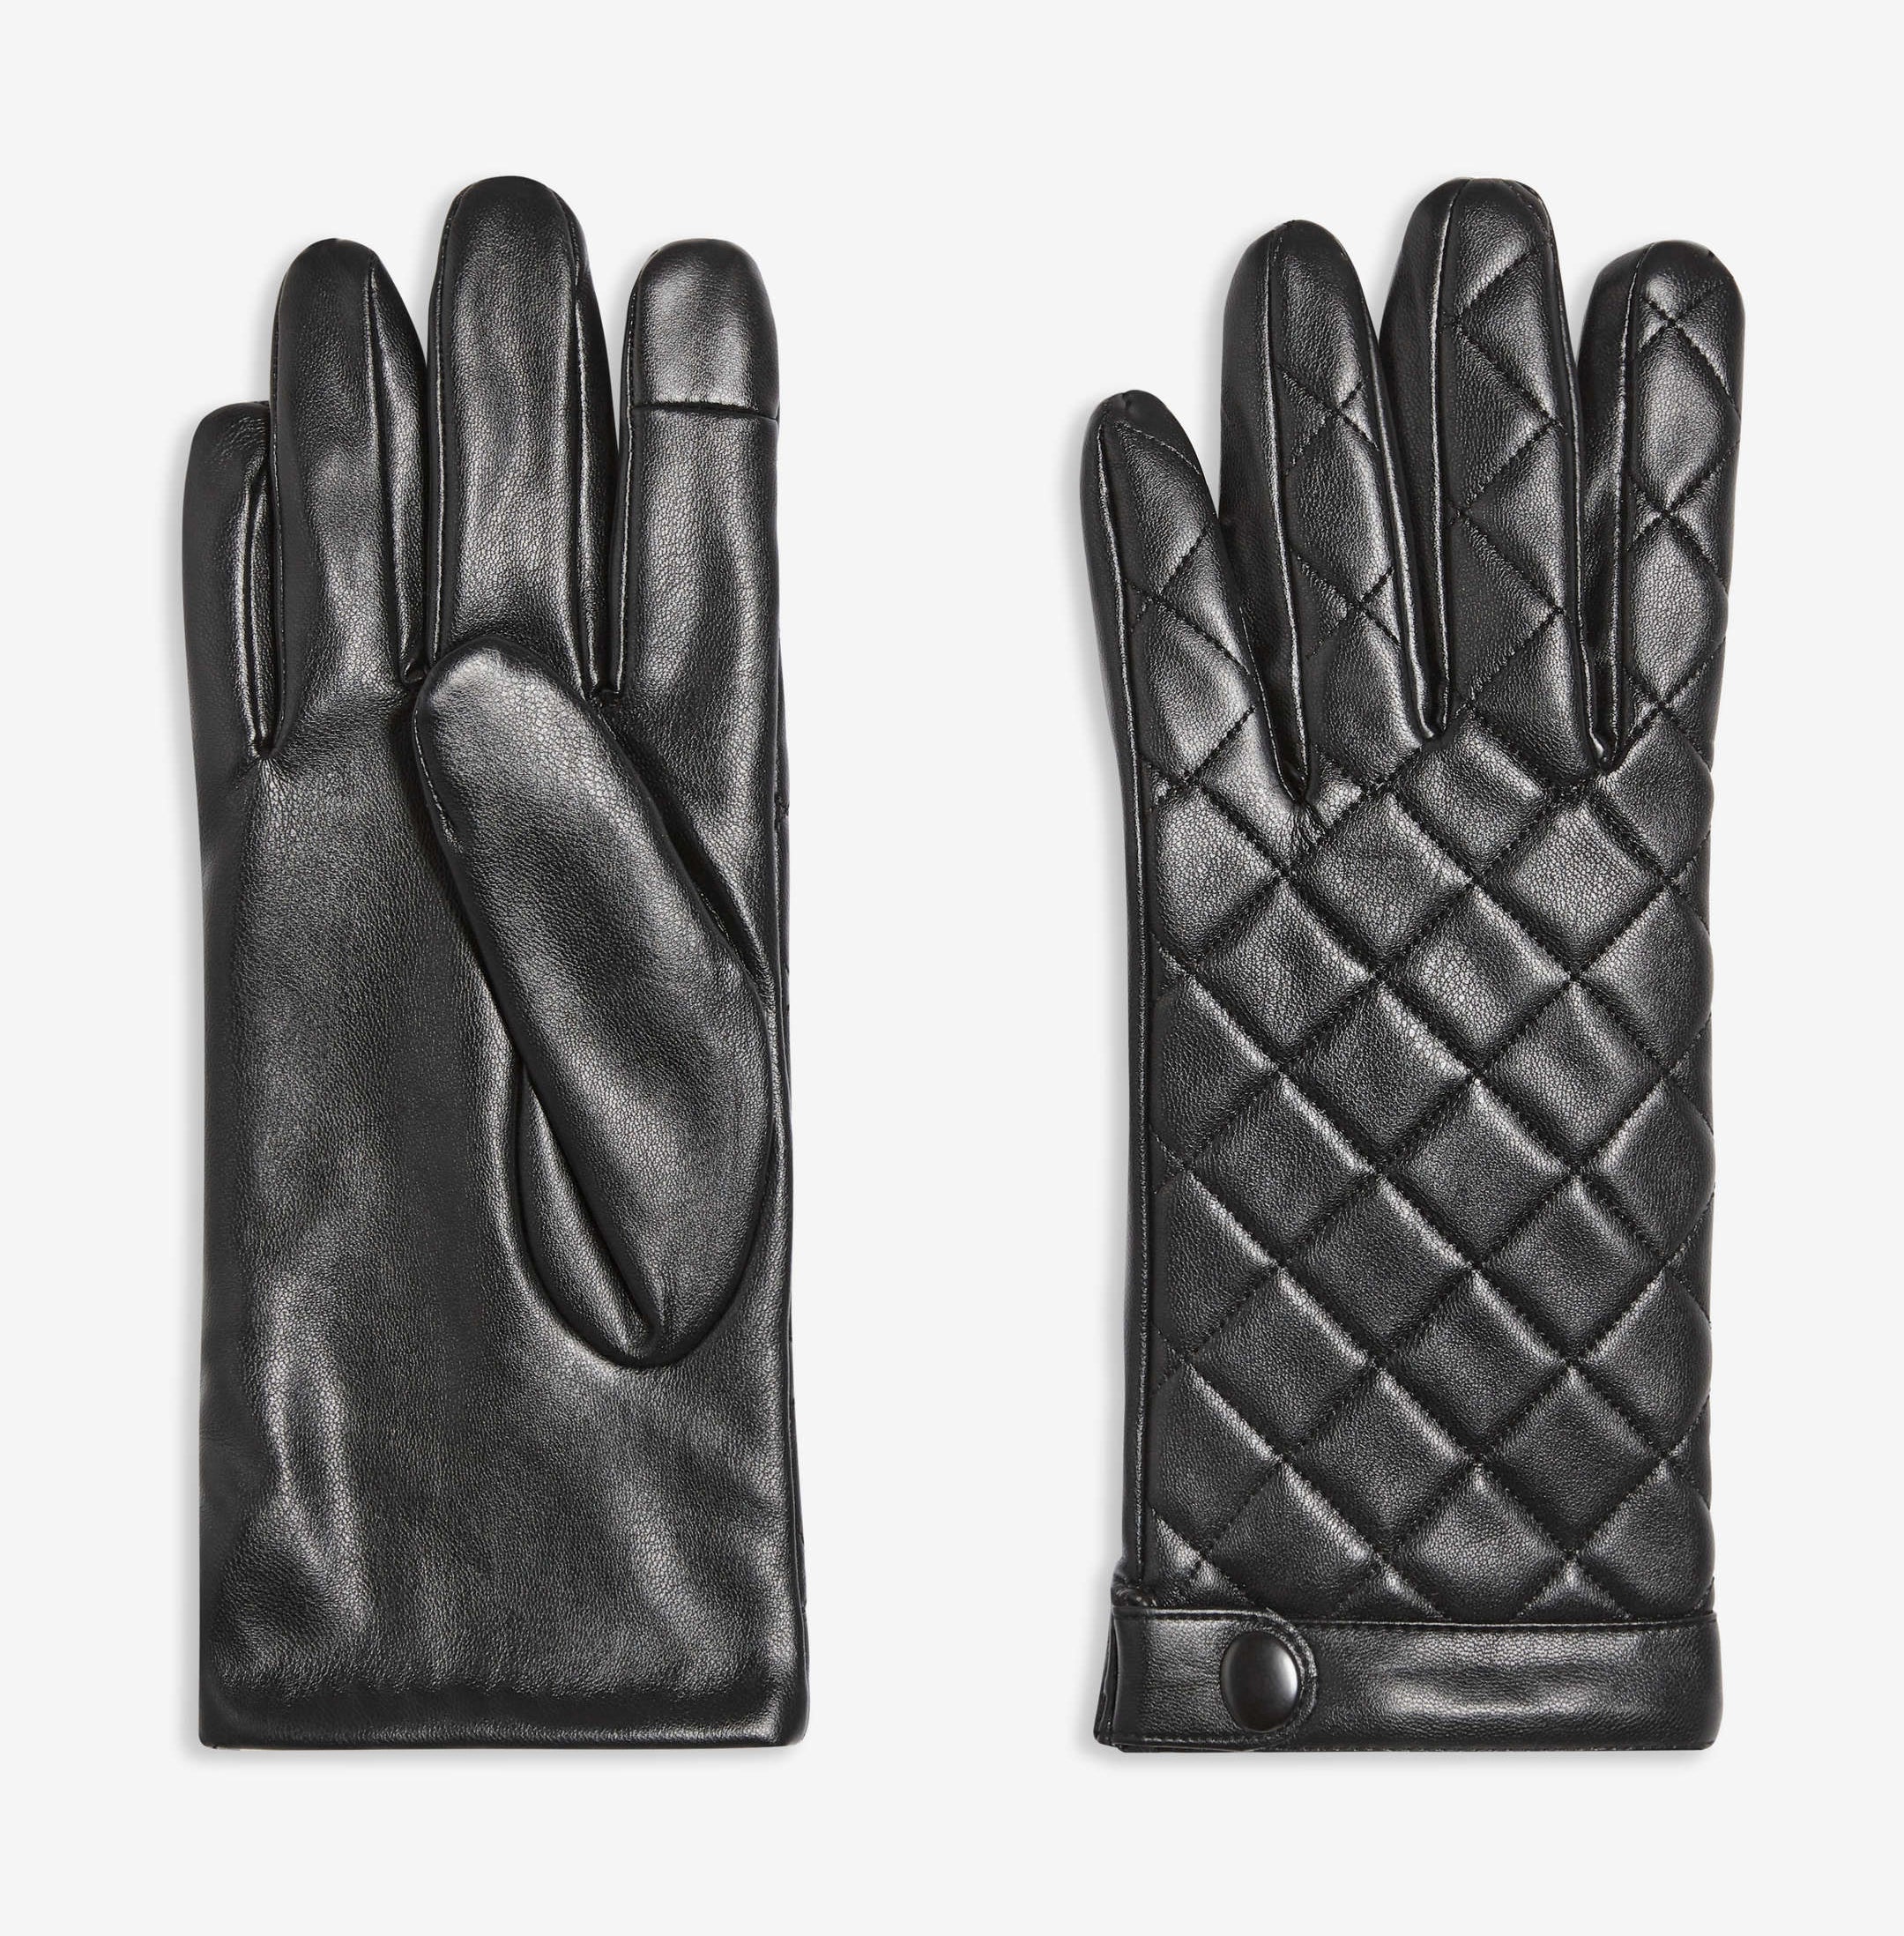 A pair of faux leather gloves with a quilted pattern